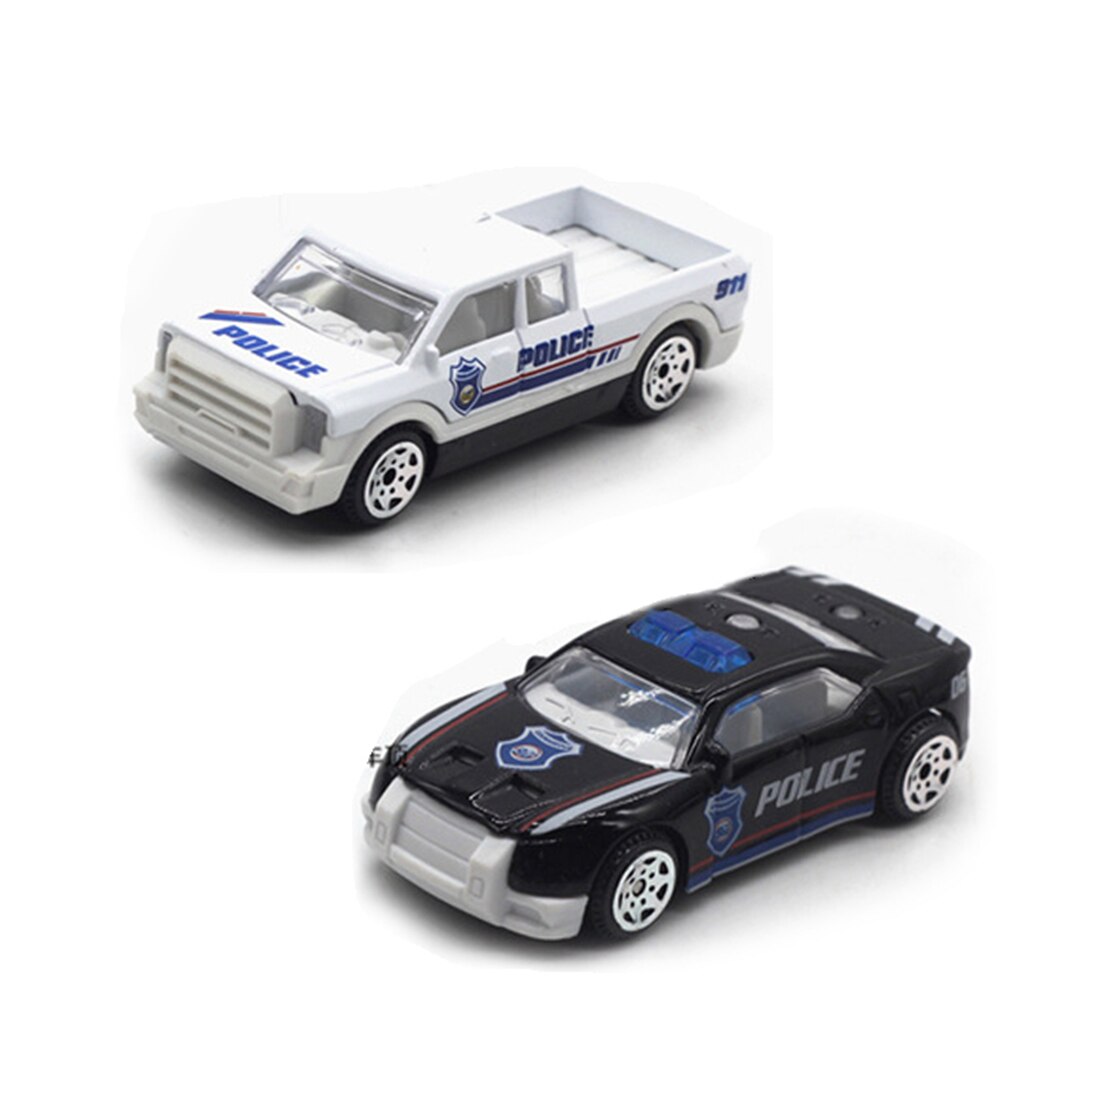 5 piece set police rescue team model Hot 1:64 alloy car educational toy car Christmas birthday gift